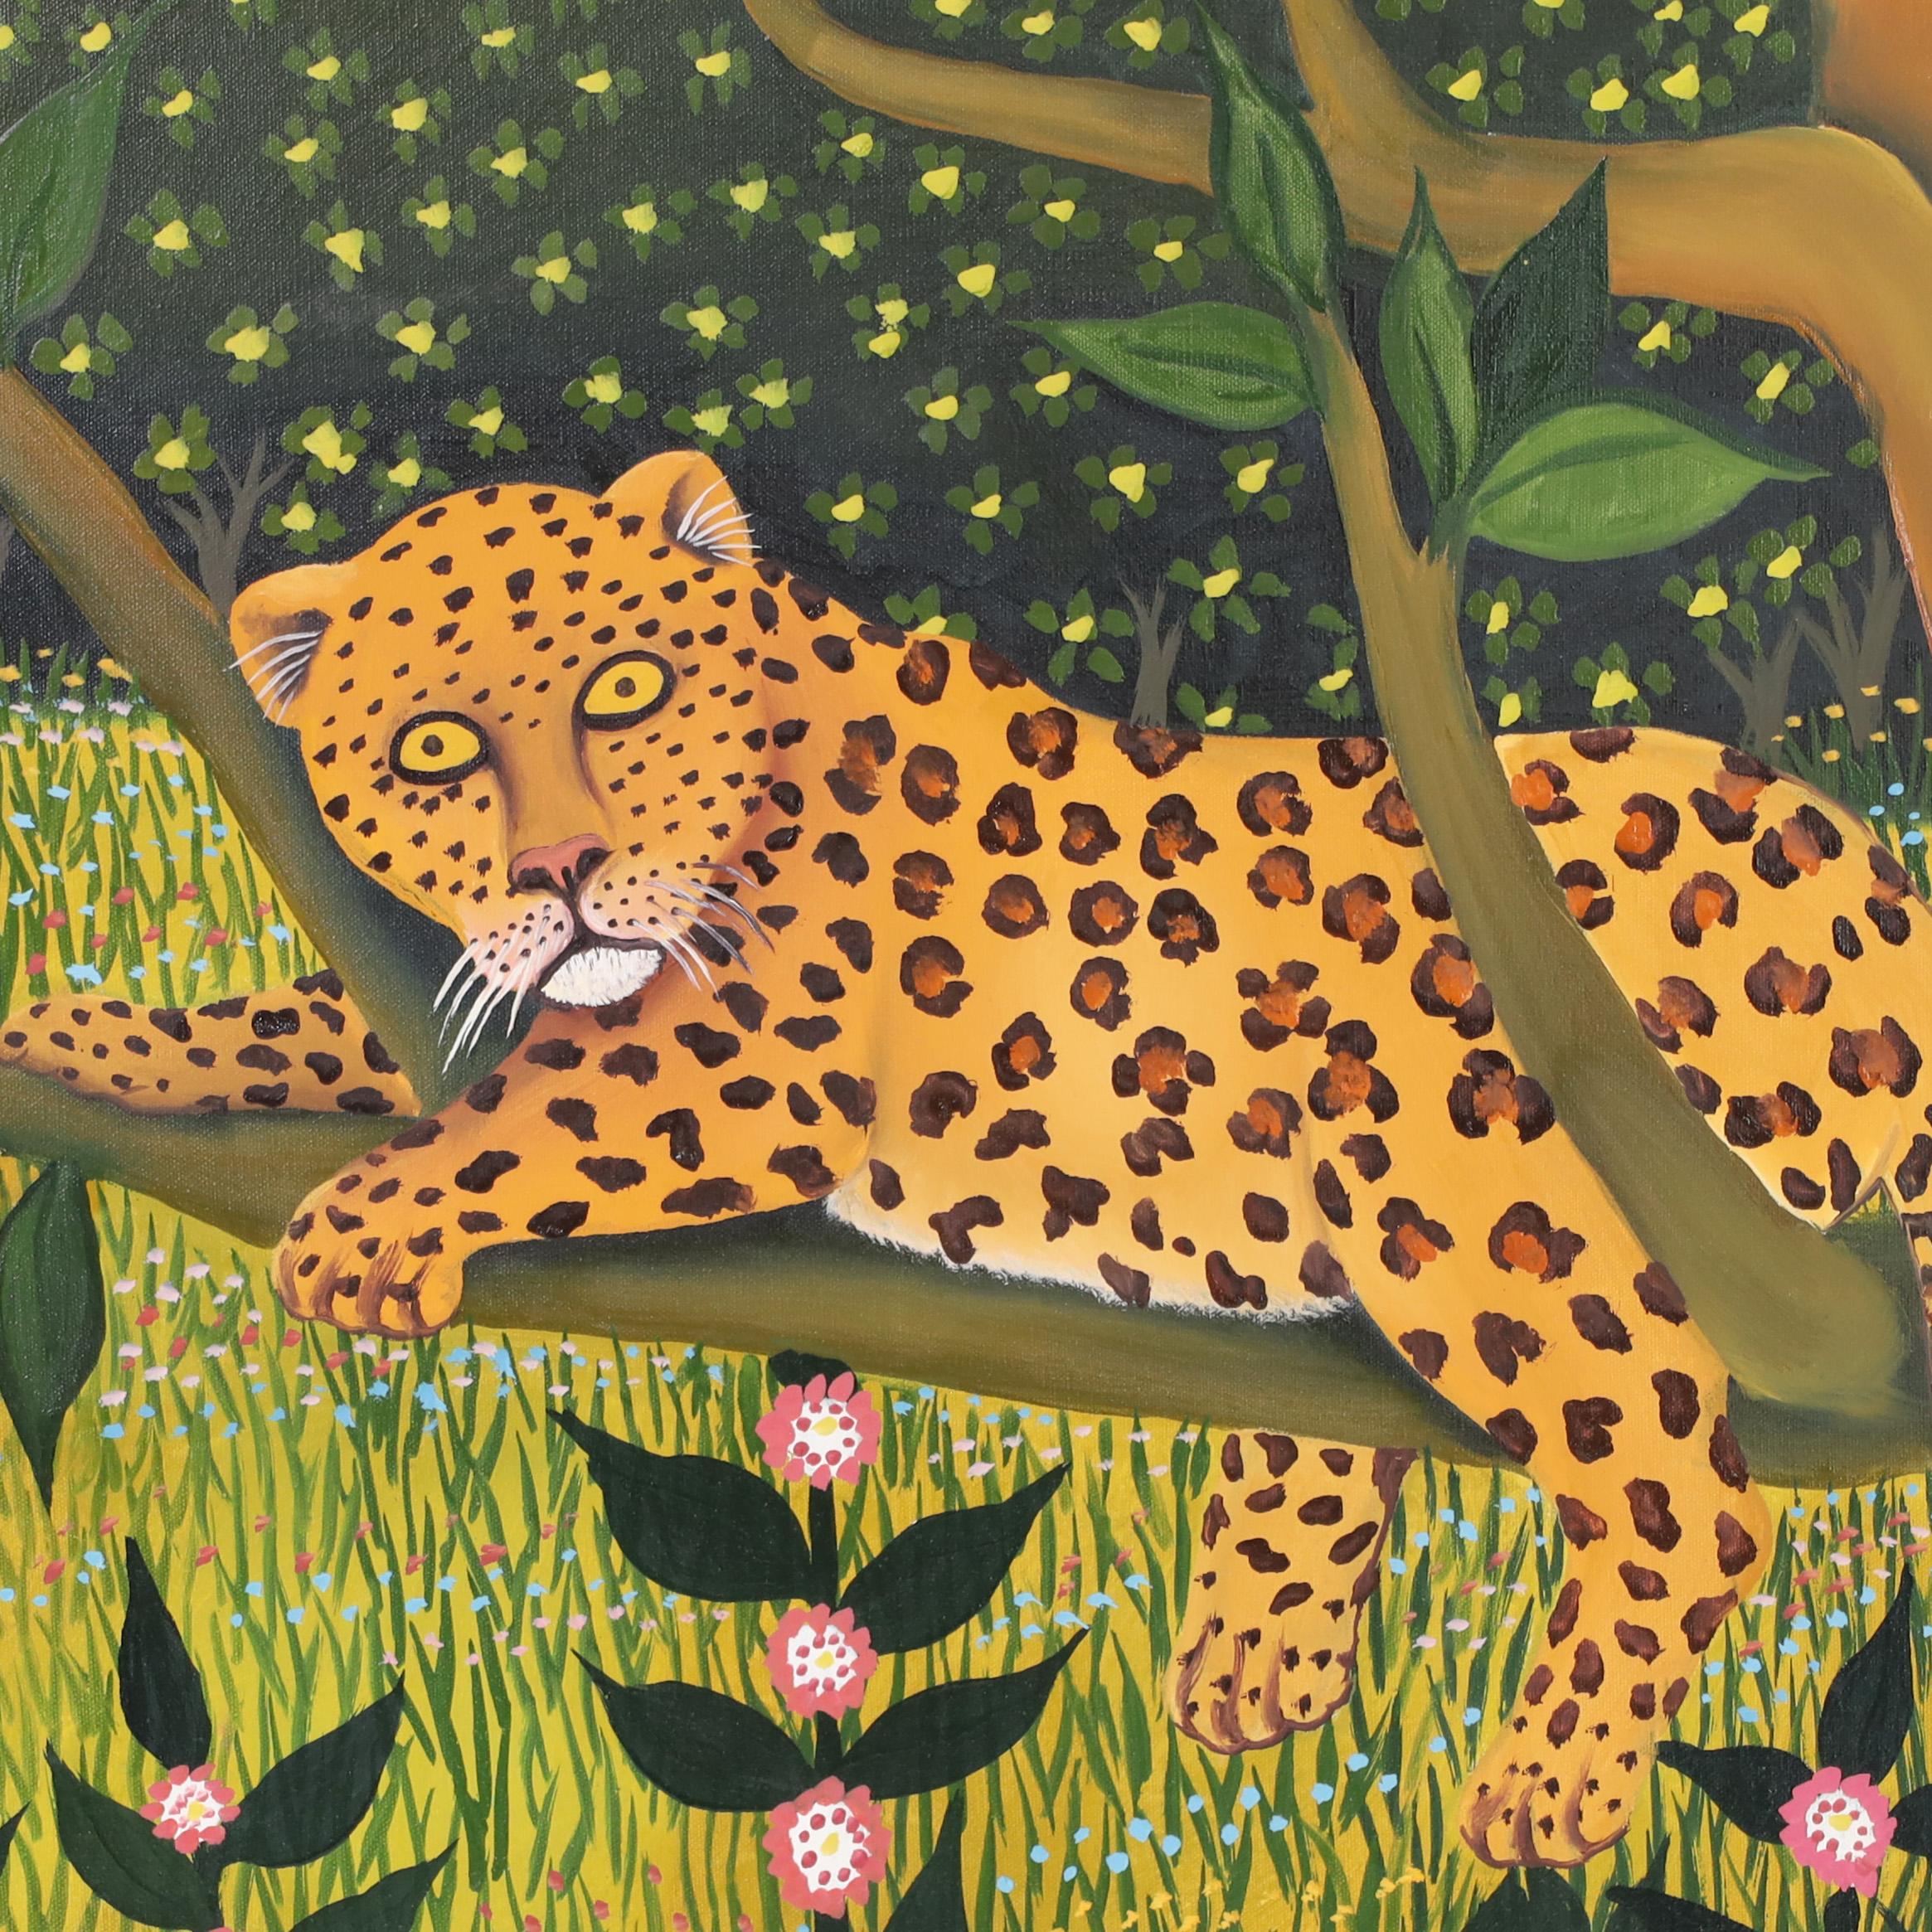 Vintage Painting on Canvas of a Leopard and Parrot in a Jungle Setting For Sale 4